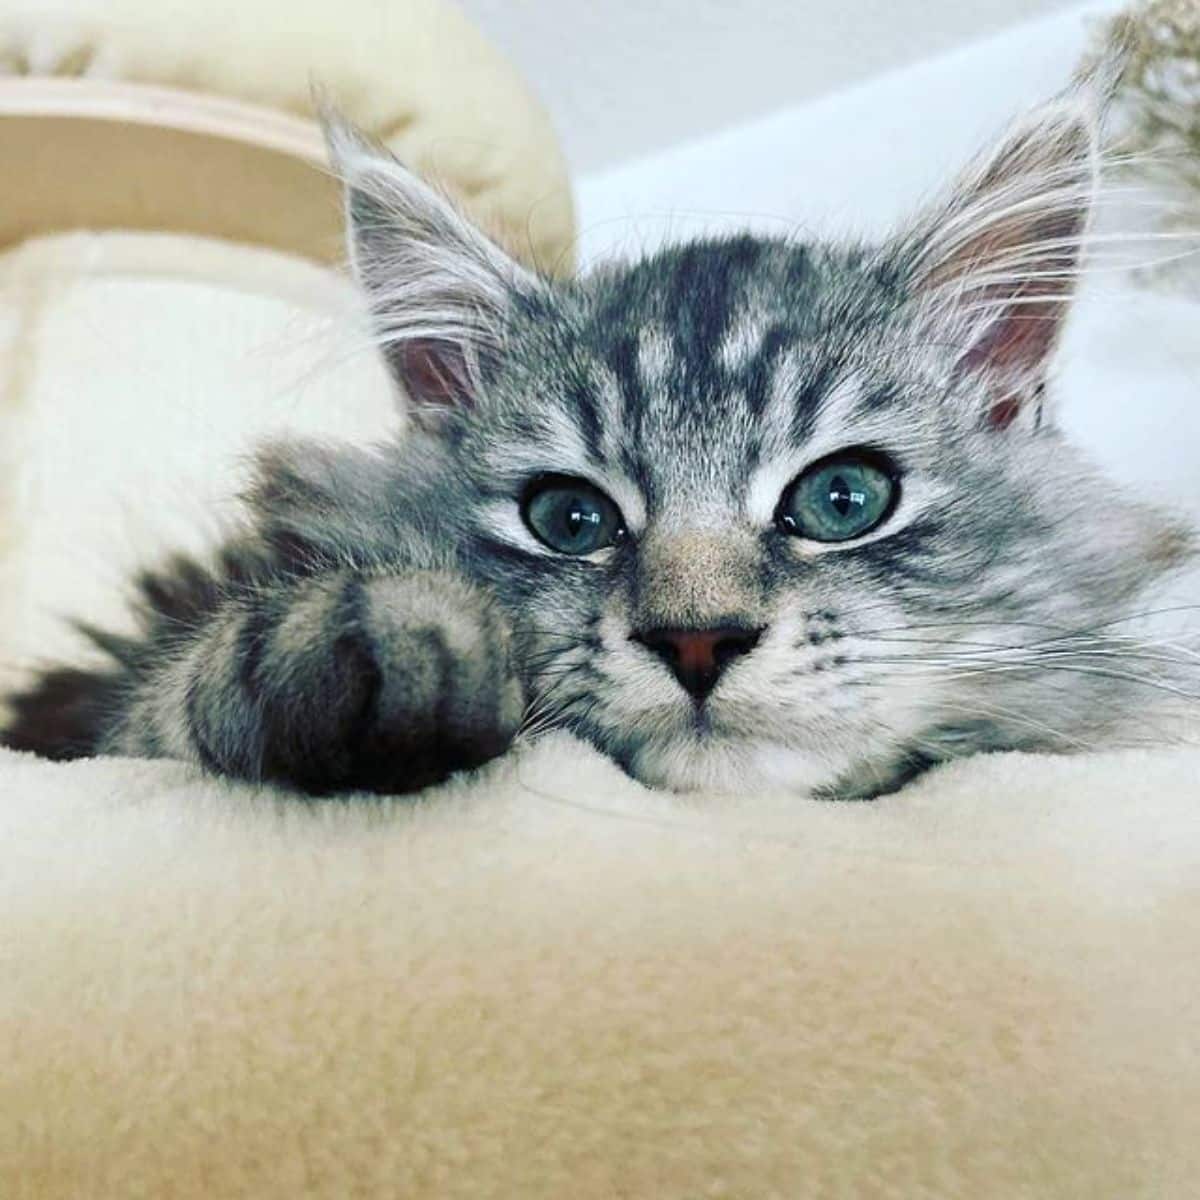 A close-up of a gray maine coon kitten lying on a cat tree.